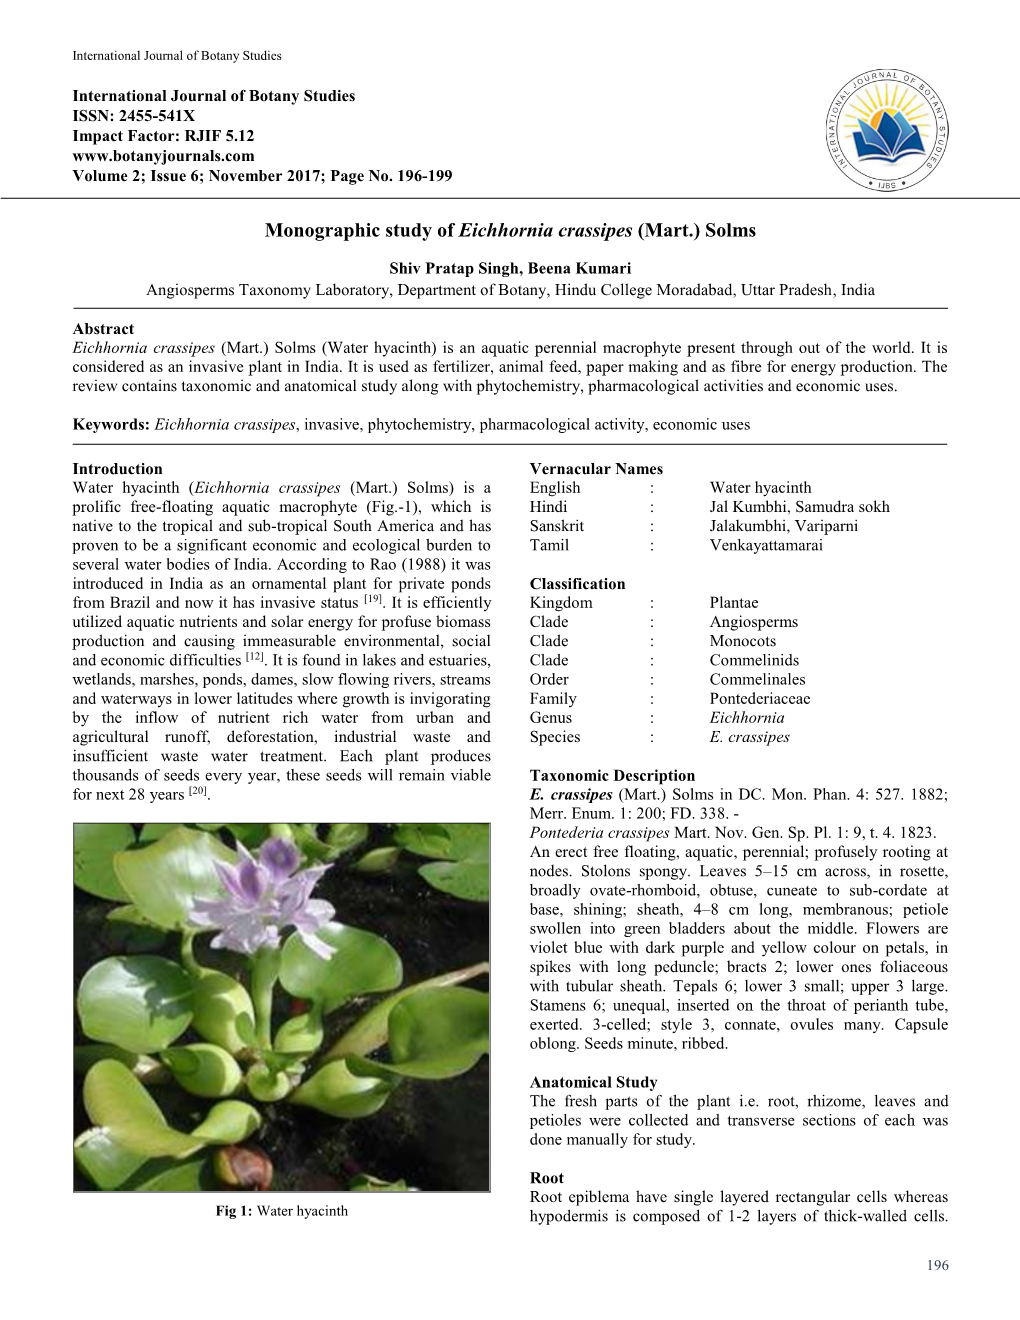 Monographic Study of Eichhornia Crassipes (Mart.) Solms